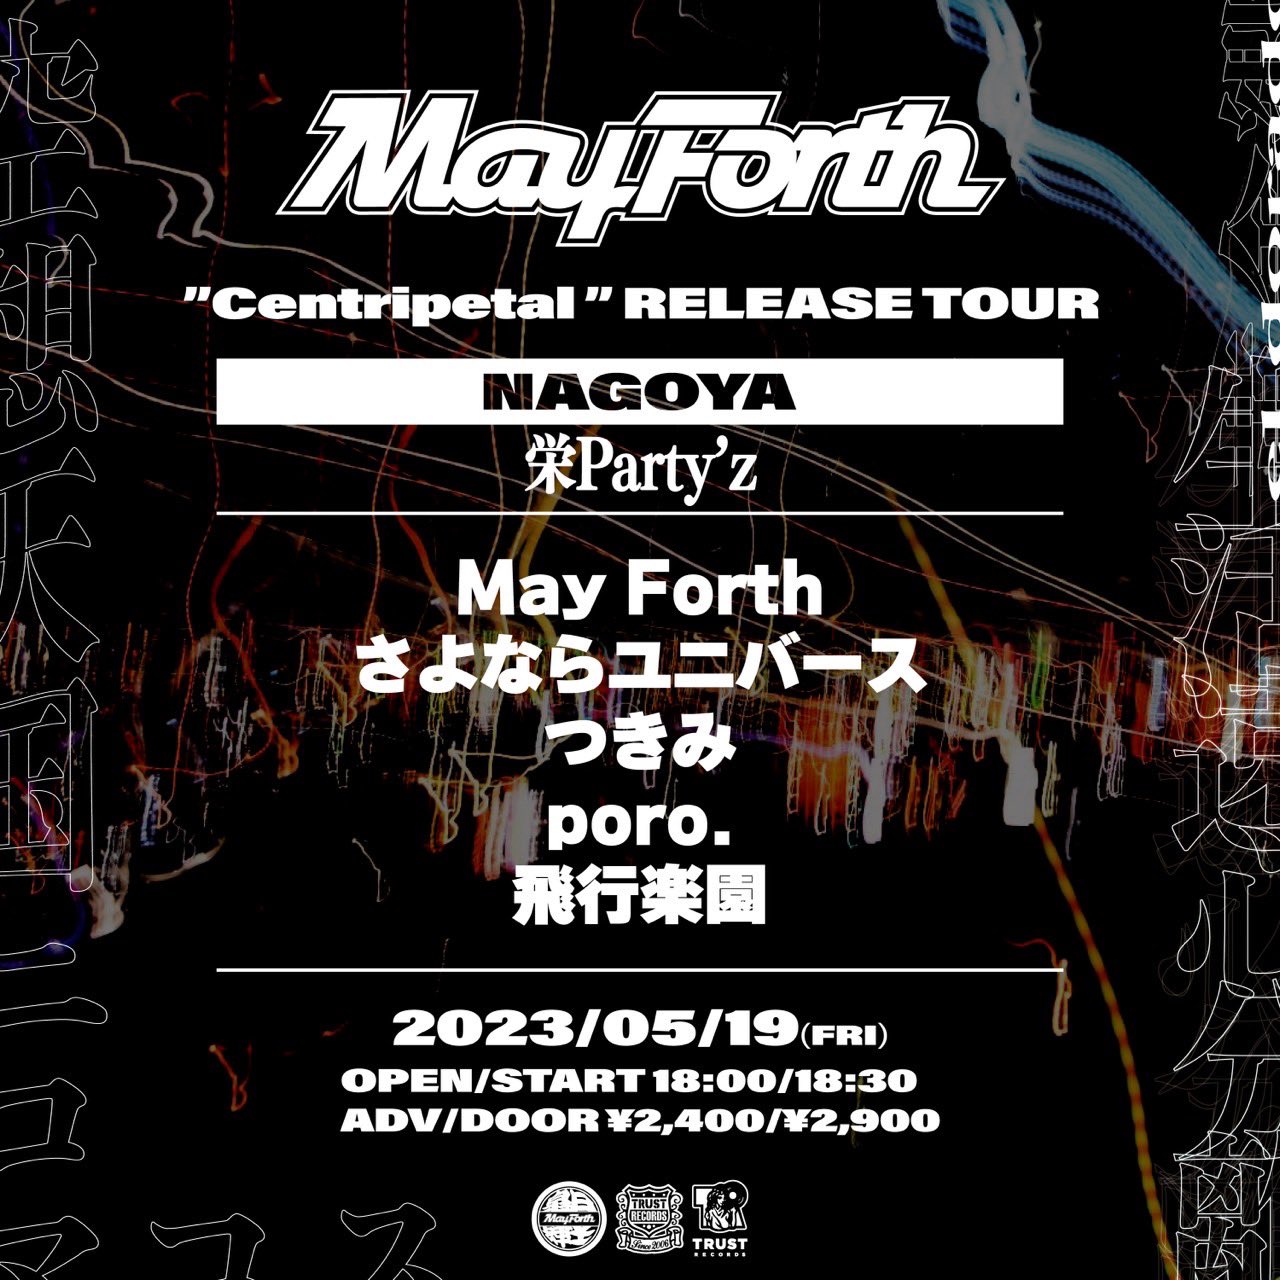 May Forth pre. "Centripetal RELEASE TOUR"